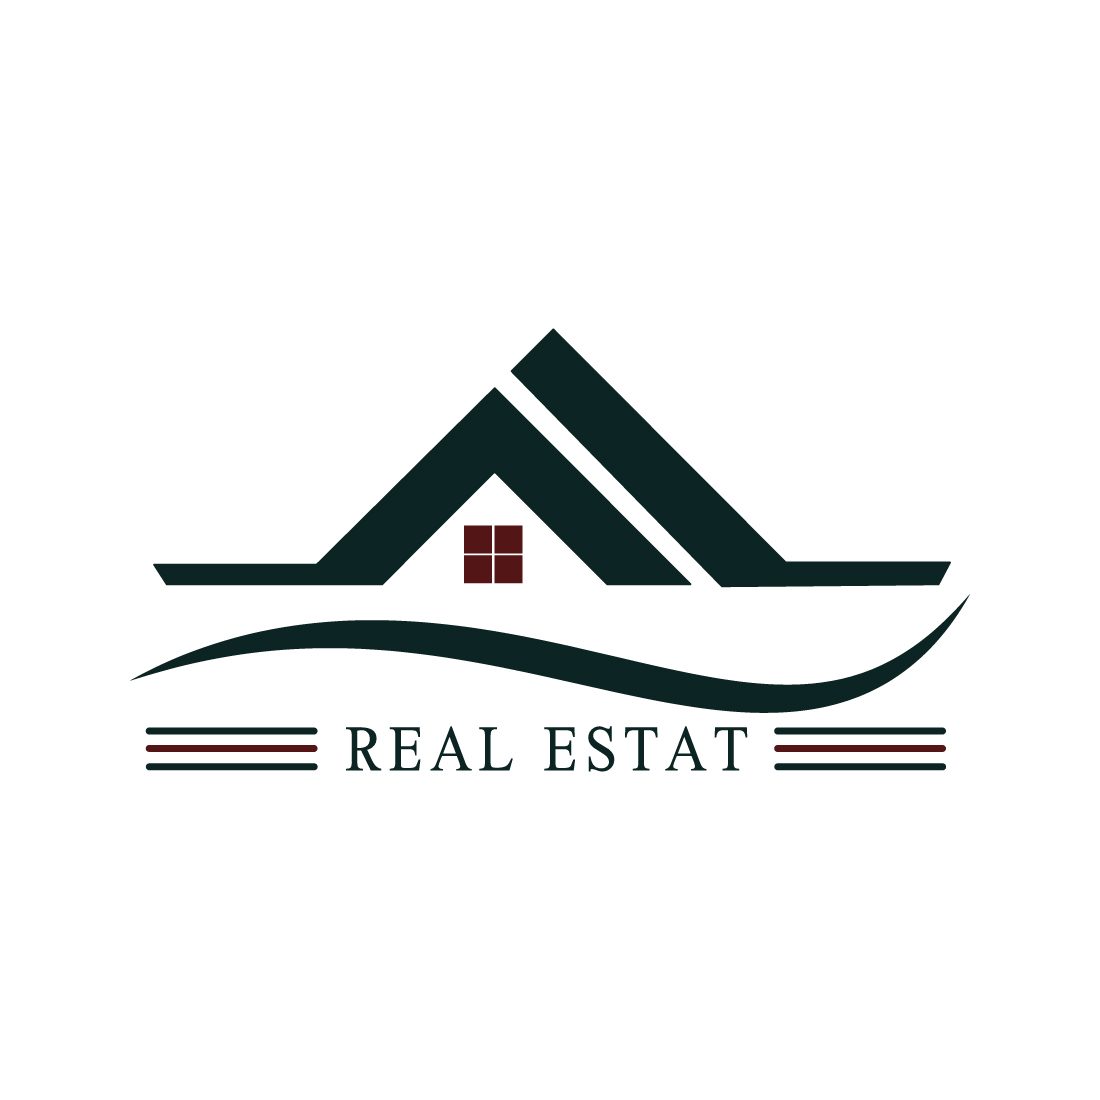 Luxury Real Estate logo design vector images Home House logo design template arts Stay House logo design best company identity preview image.